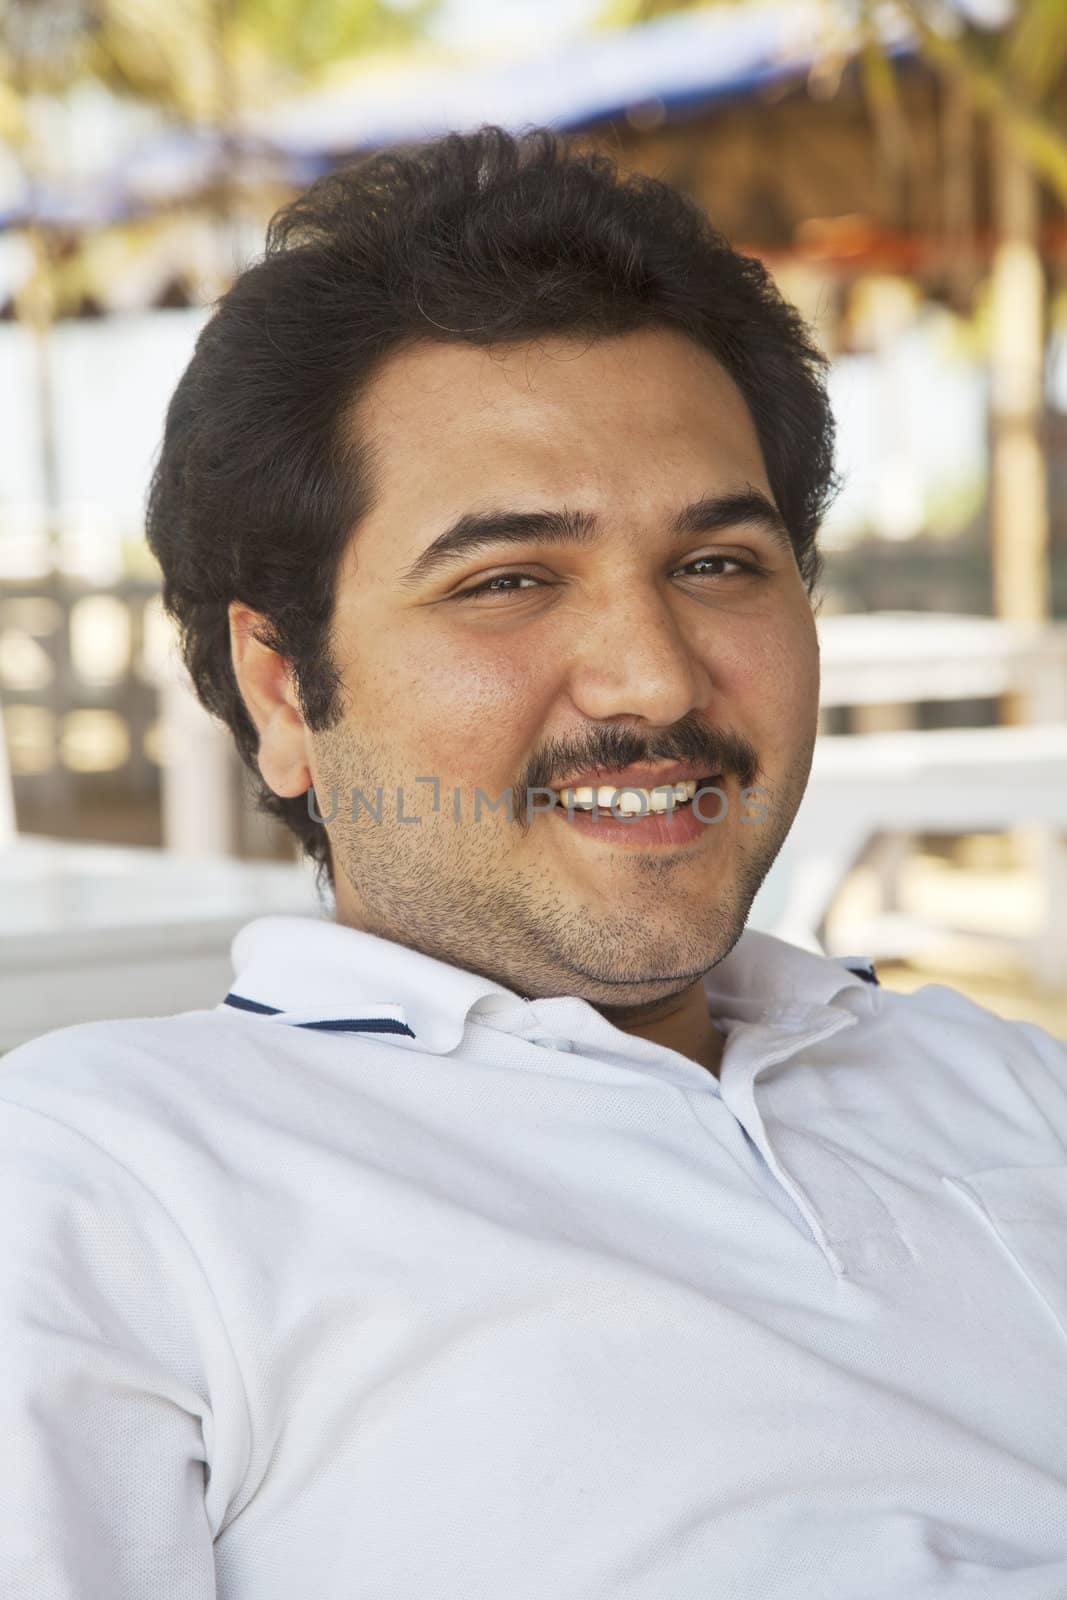 vertical portrait of a smiling young adult male, combed back hair, mustache, unshaved, celebrity look a like, showing teeth, wearing white pole shirt, in the shade outdoors leaning back in a relaxed posture